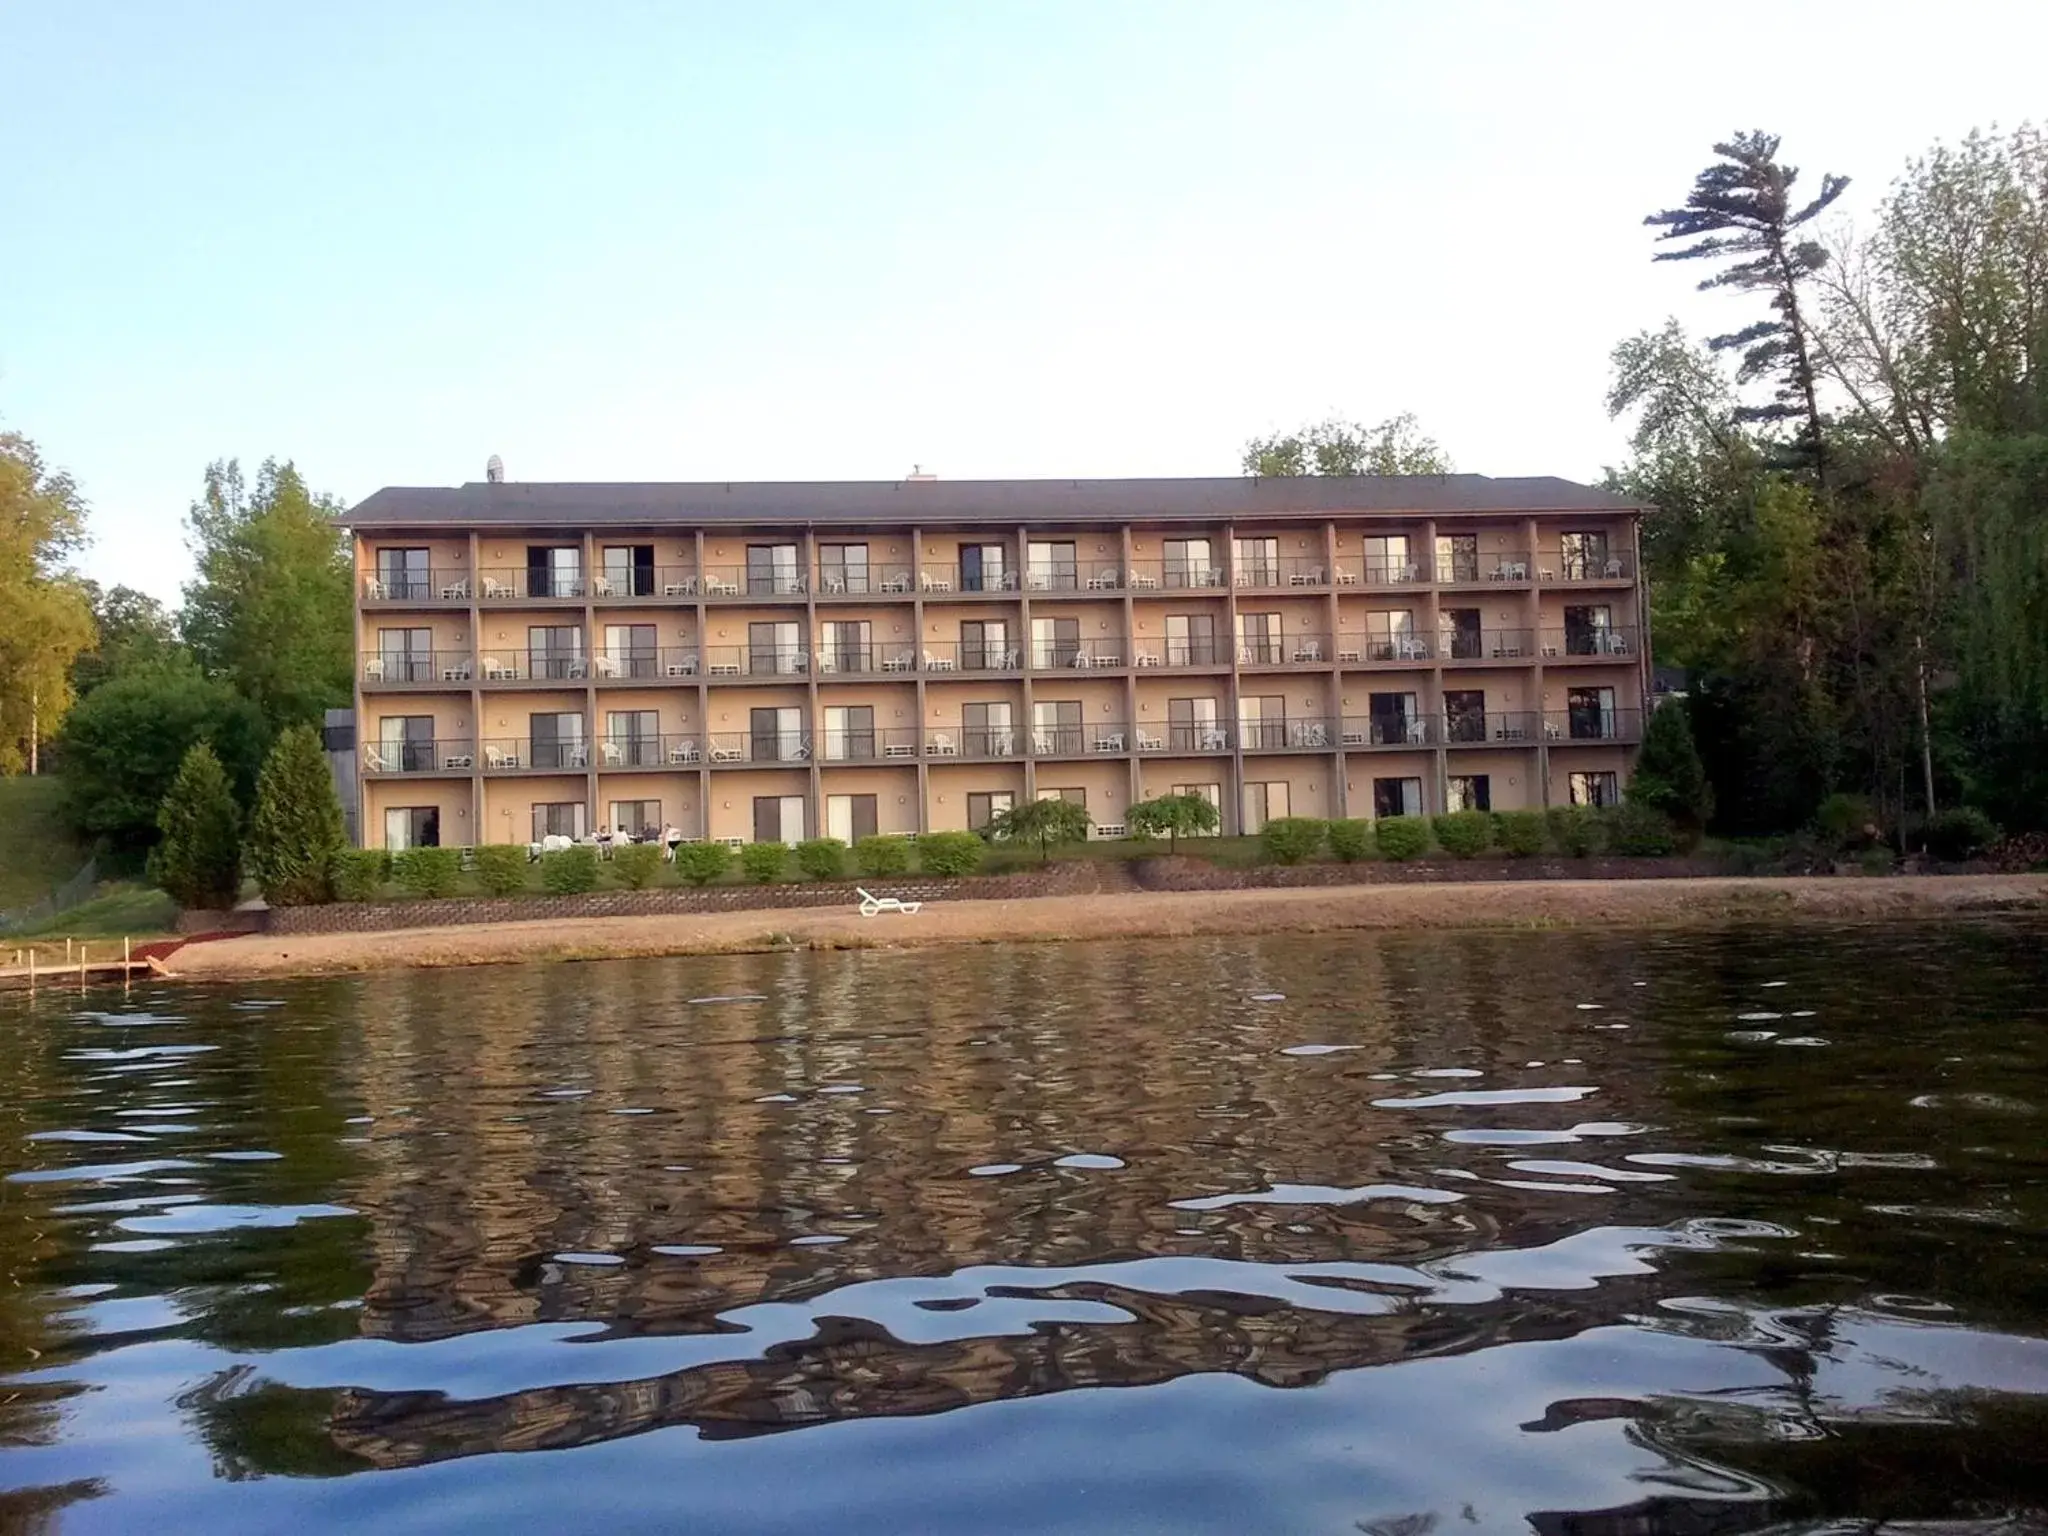 Lake view, Property Building in Beachfront Hotel Houghton Lake